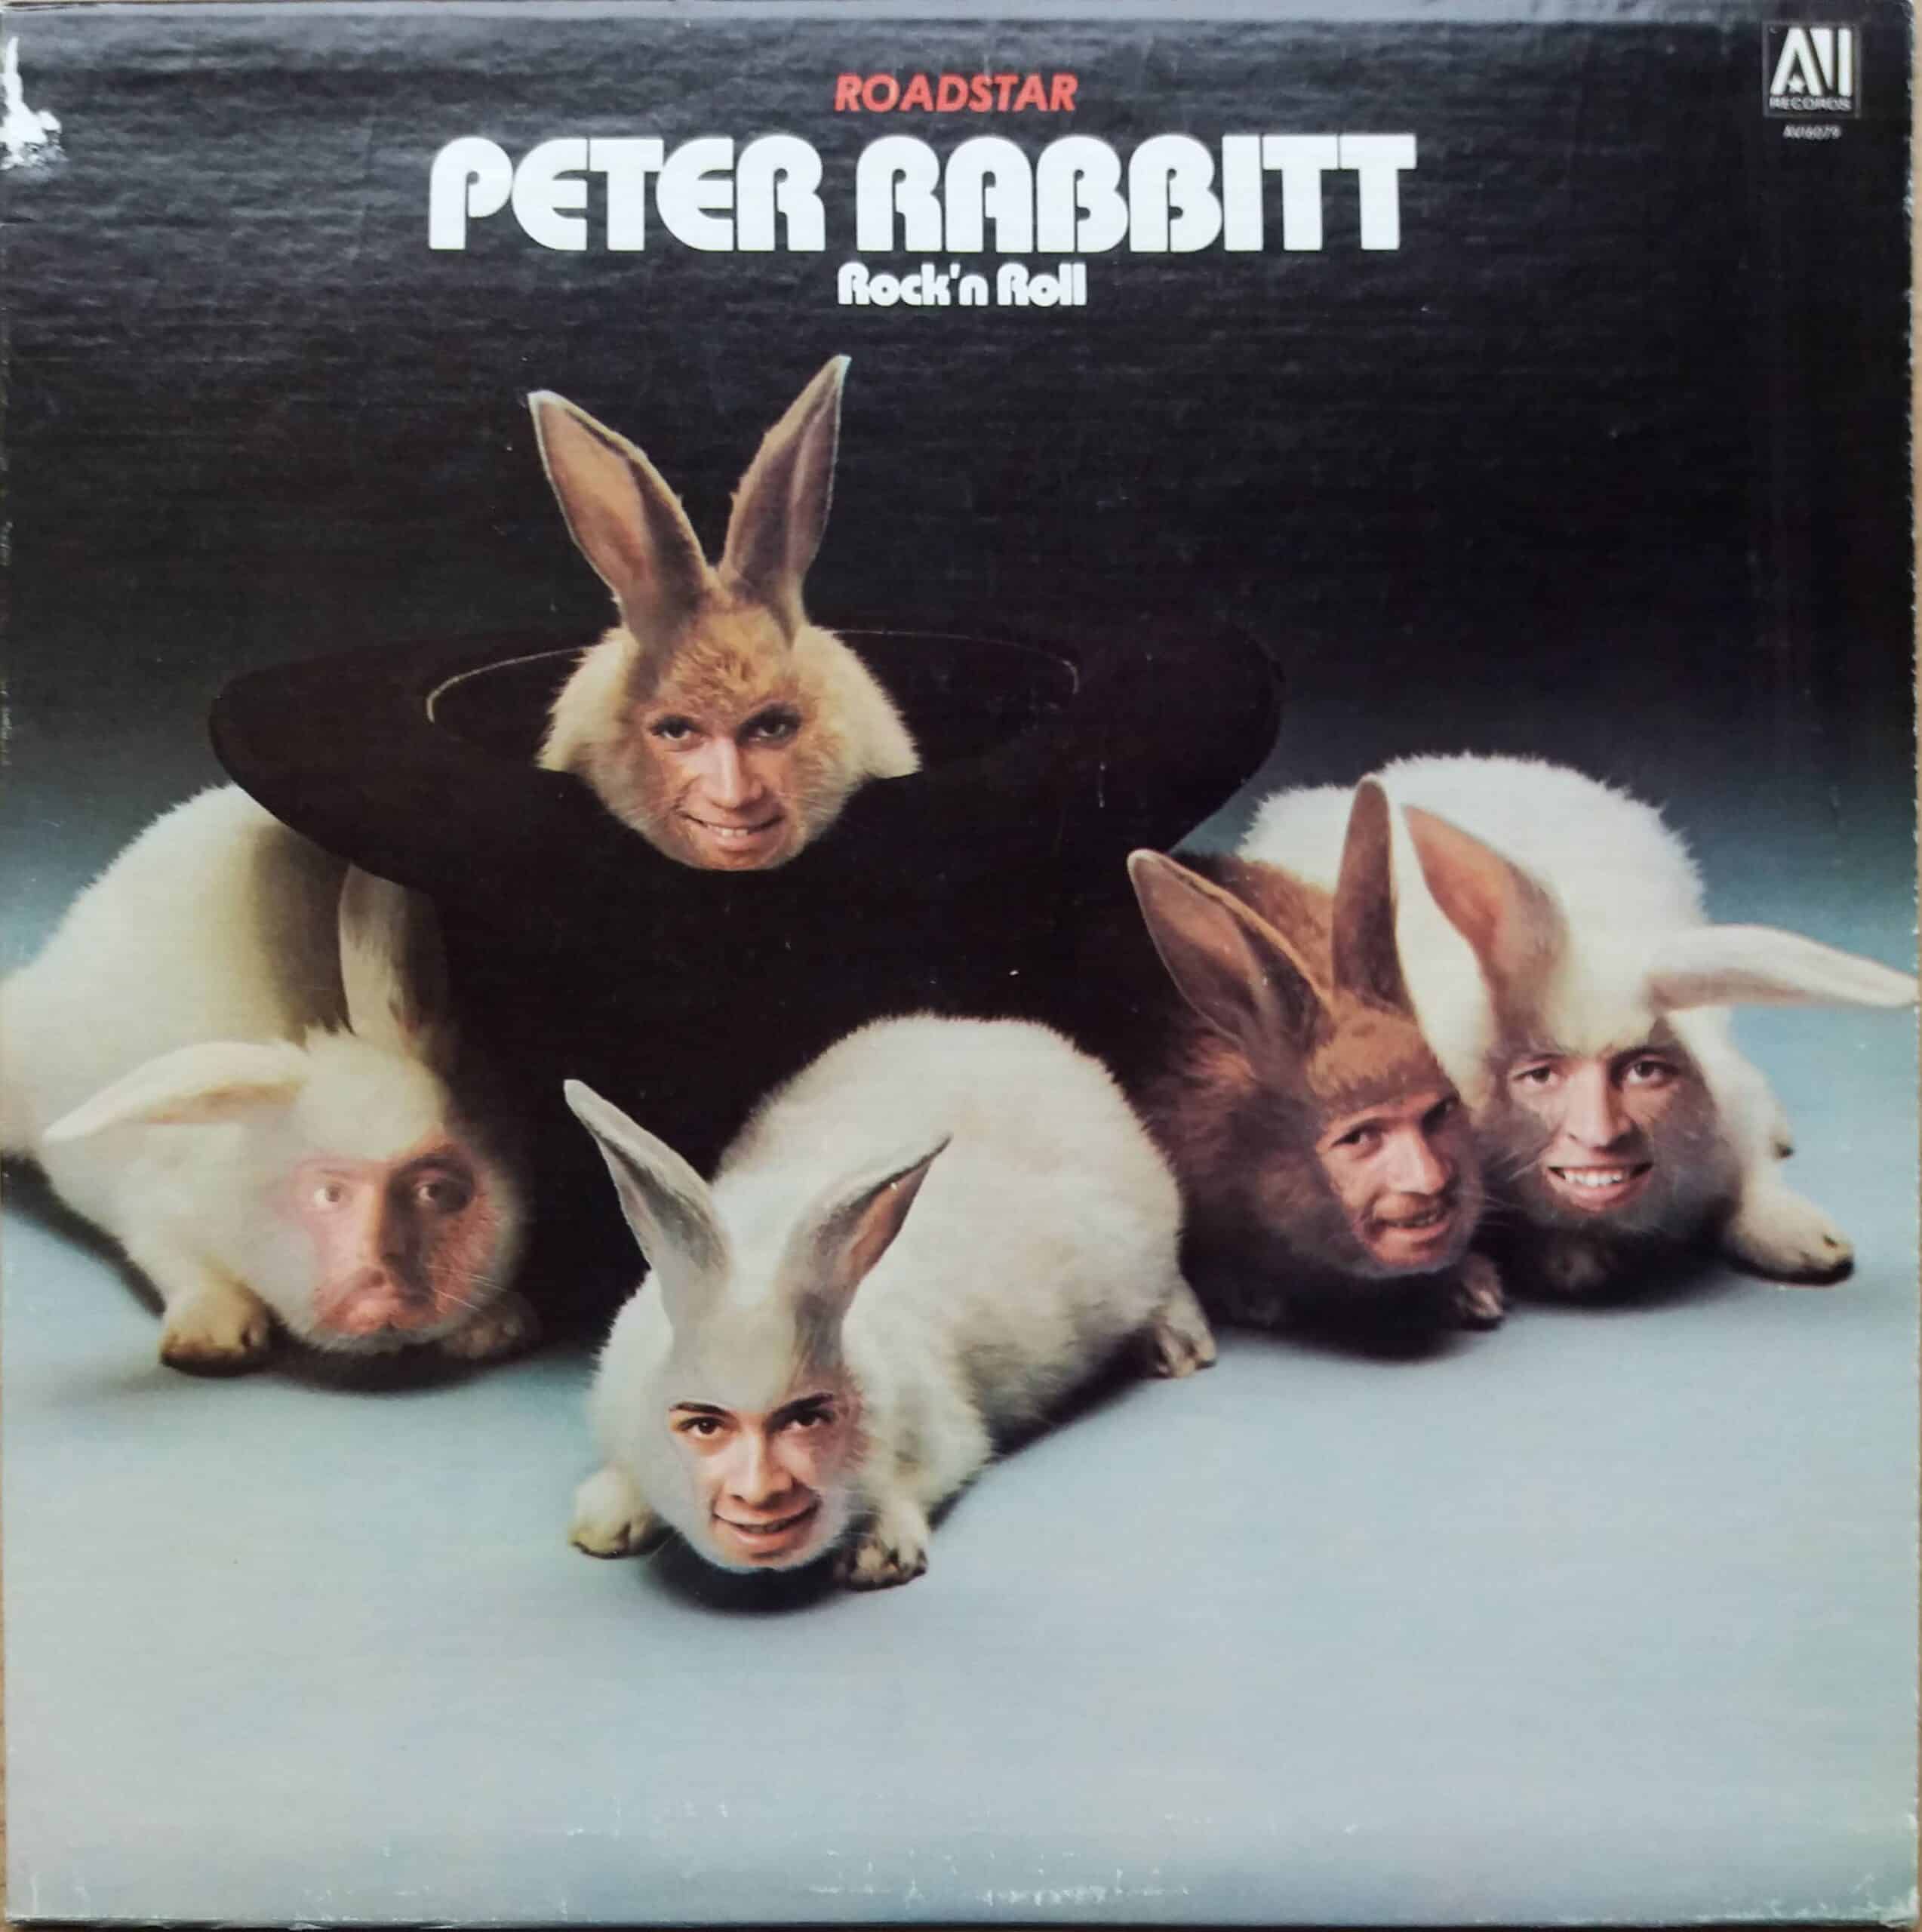 album sleeve featuring five rabbits around a top hat, but their faces have been superimposed with the faces of men. Text at the top reads Peter Rabbitt (the band who came up with this questionable sleeve). From Worst Record Covers